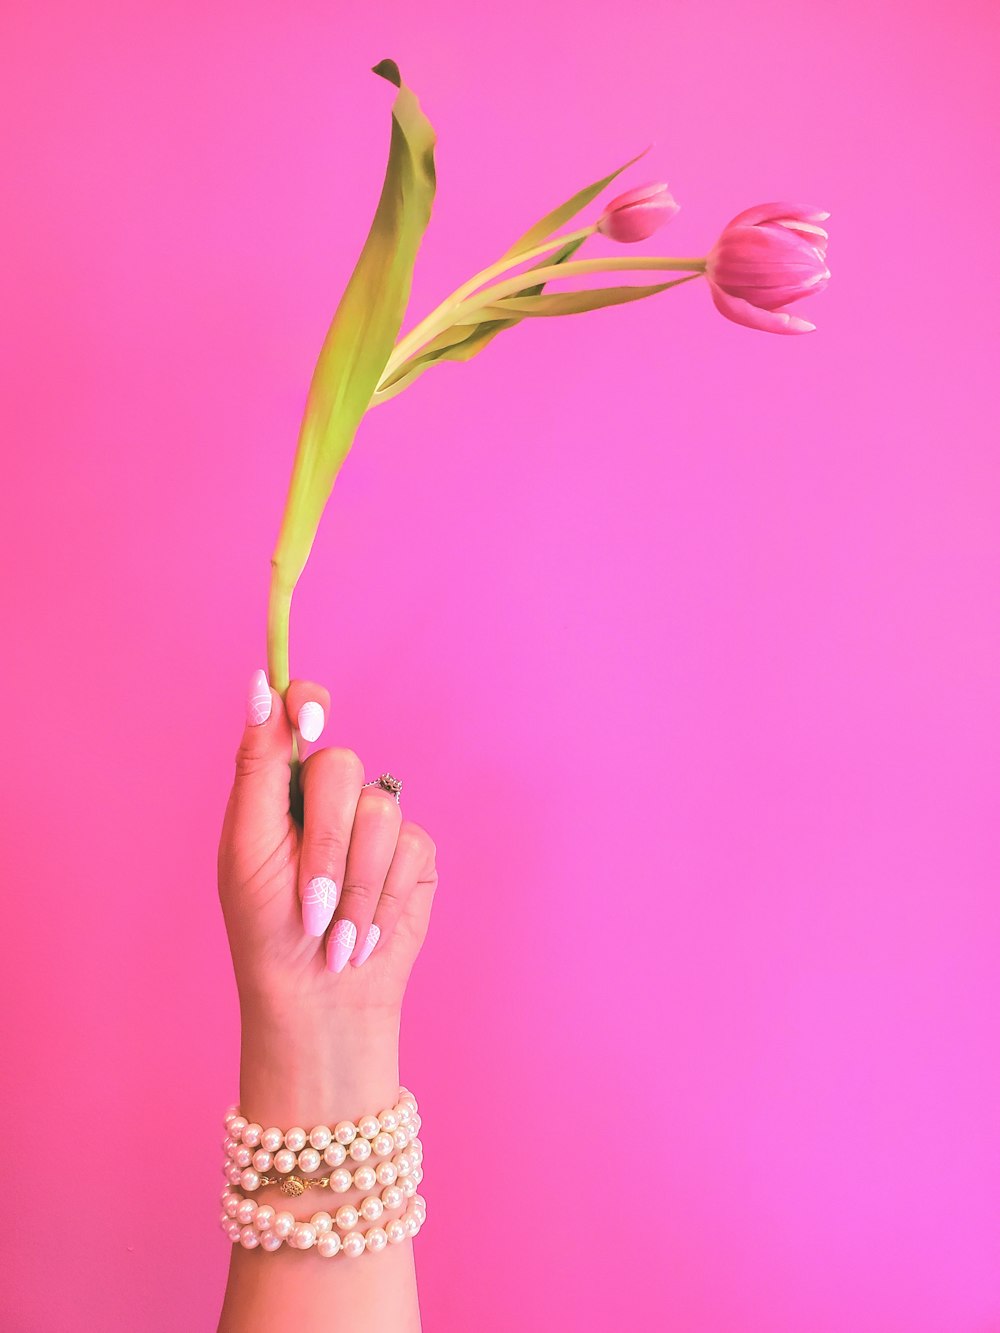 a woman's hand holding a pink flower on a pink background